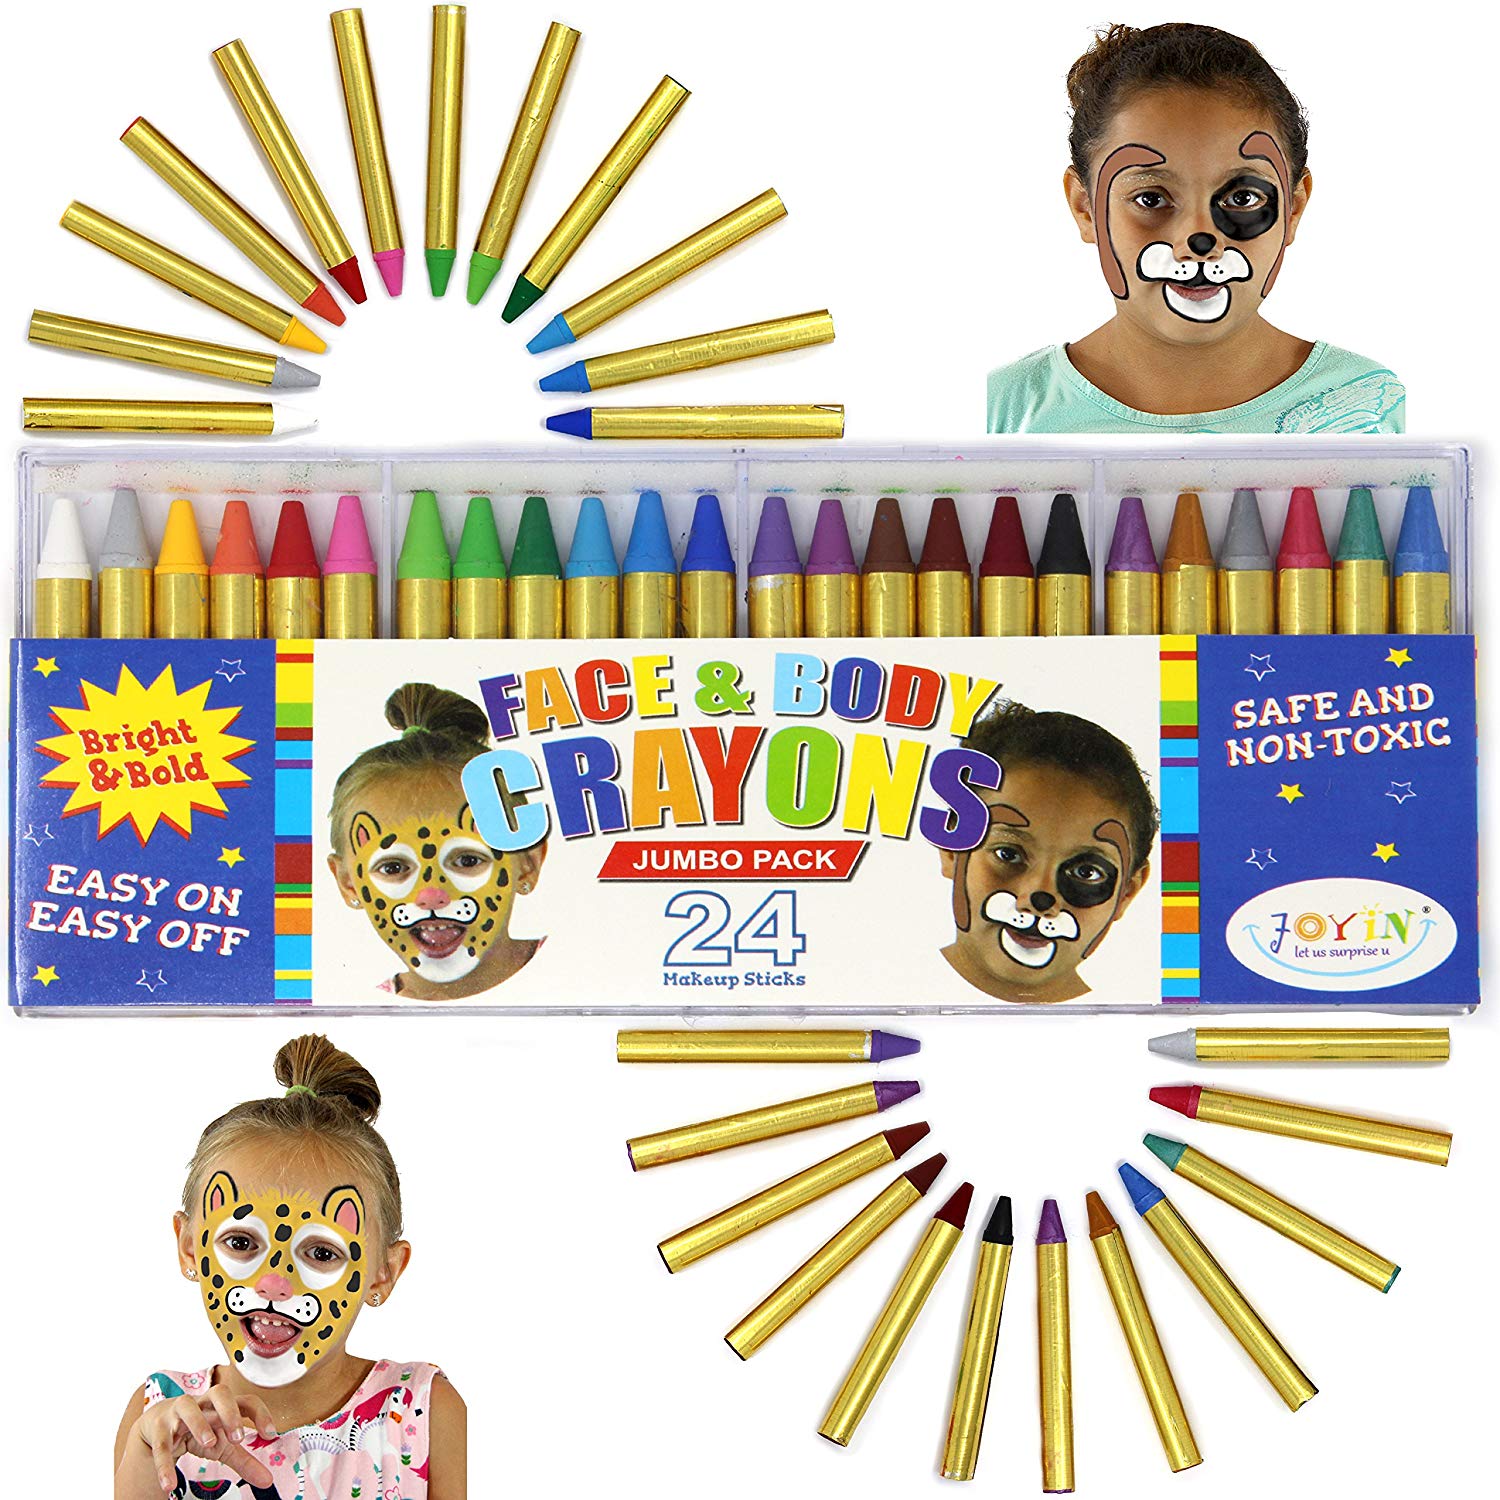 JOYIN 42pcs Face and Body Paint Crayons, Face Painting Kit Safe and Non-Toxic Ultimate Party Pack Including 14 Metallic Colors for Birthday Makeup